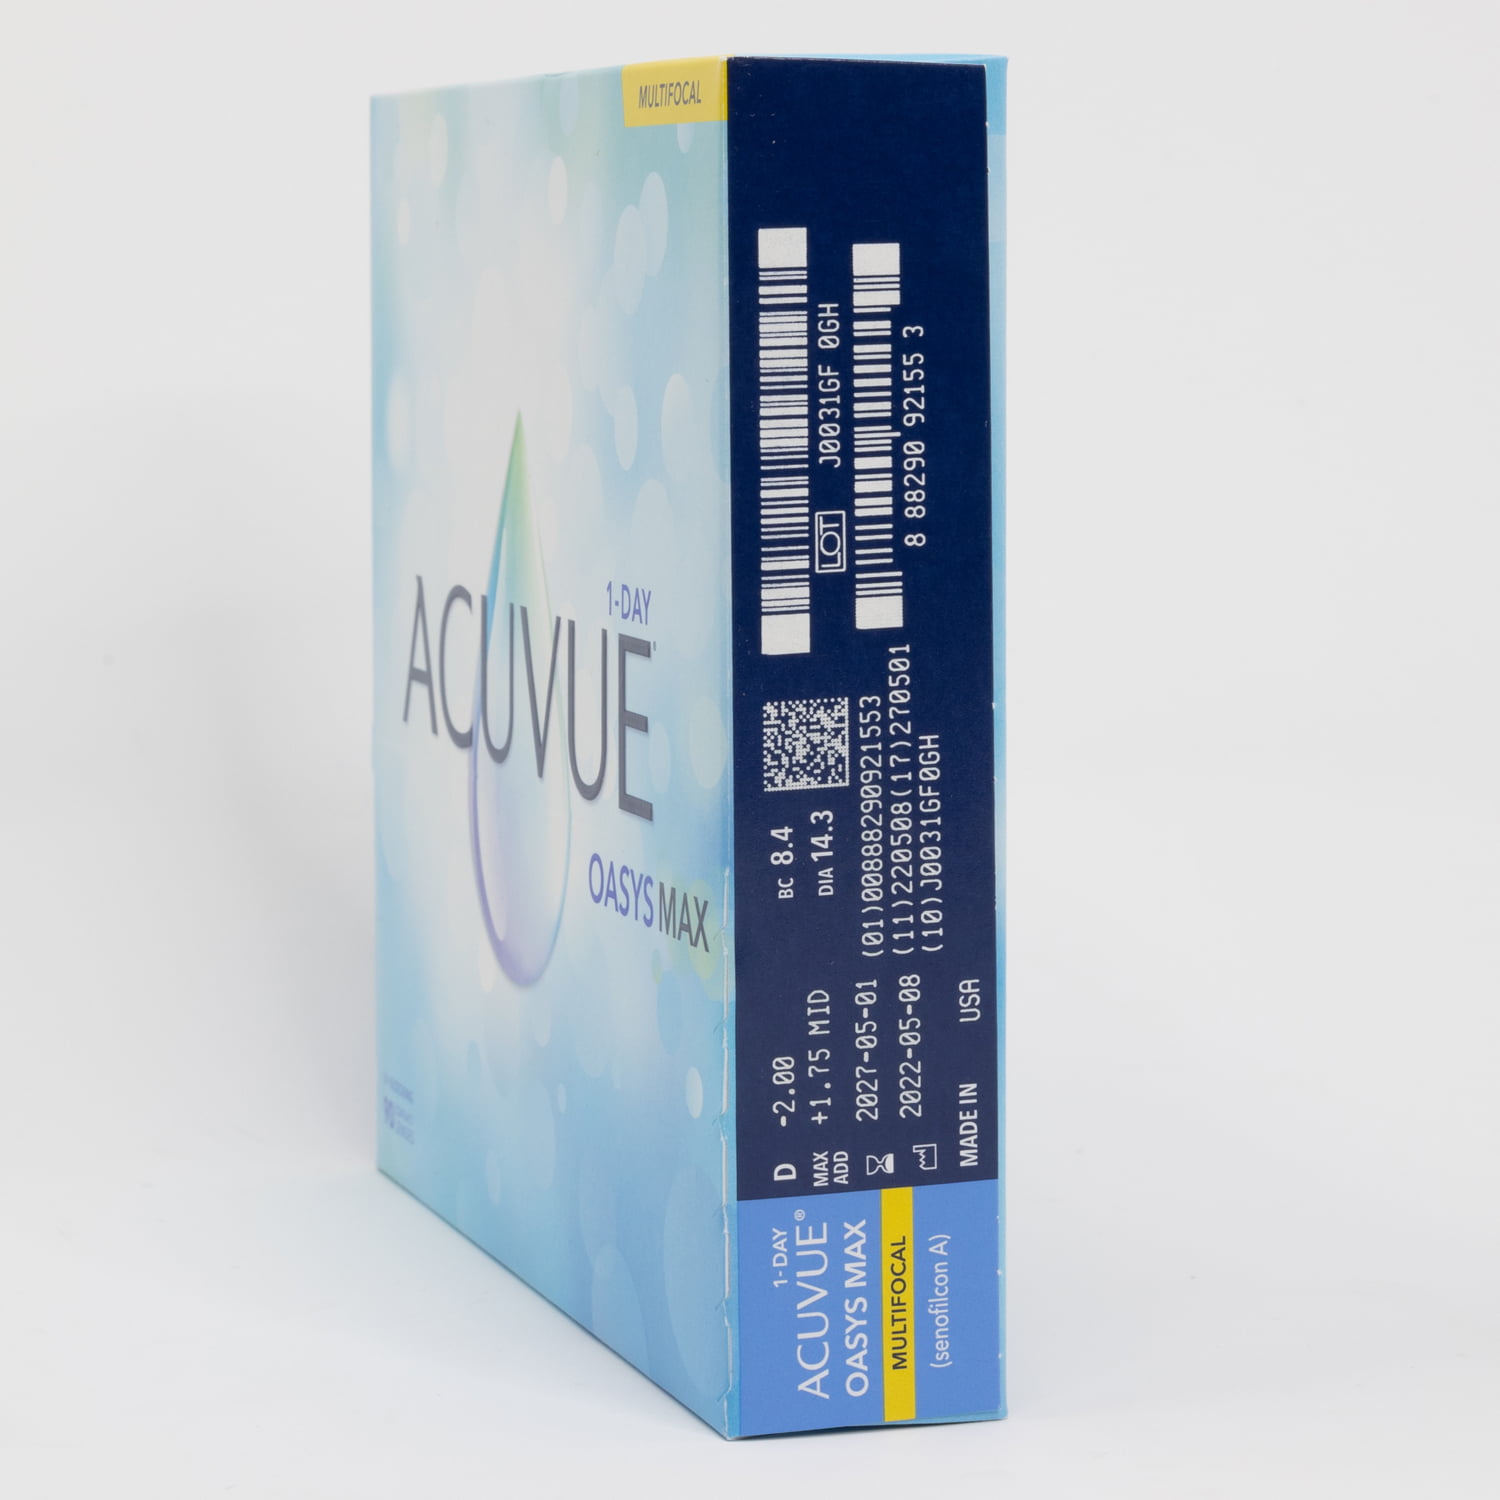 acuvue-oasys-max-1-day-multifocal-lenses-doyle